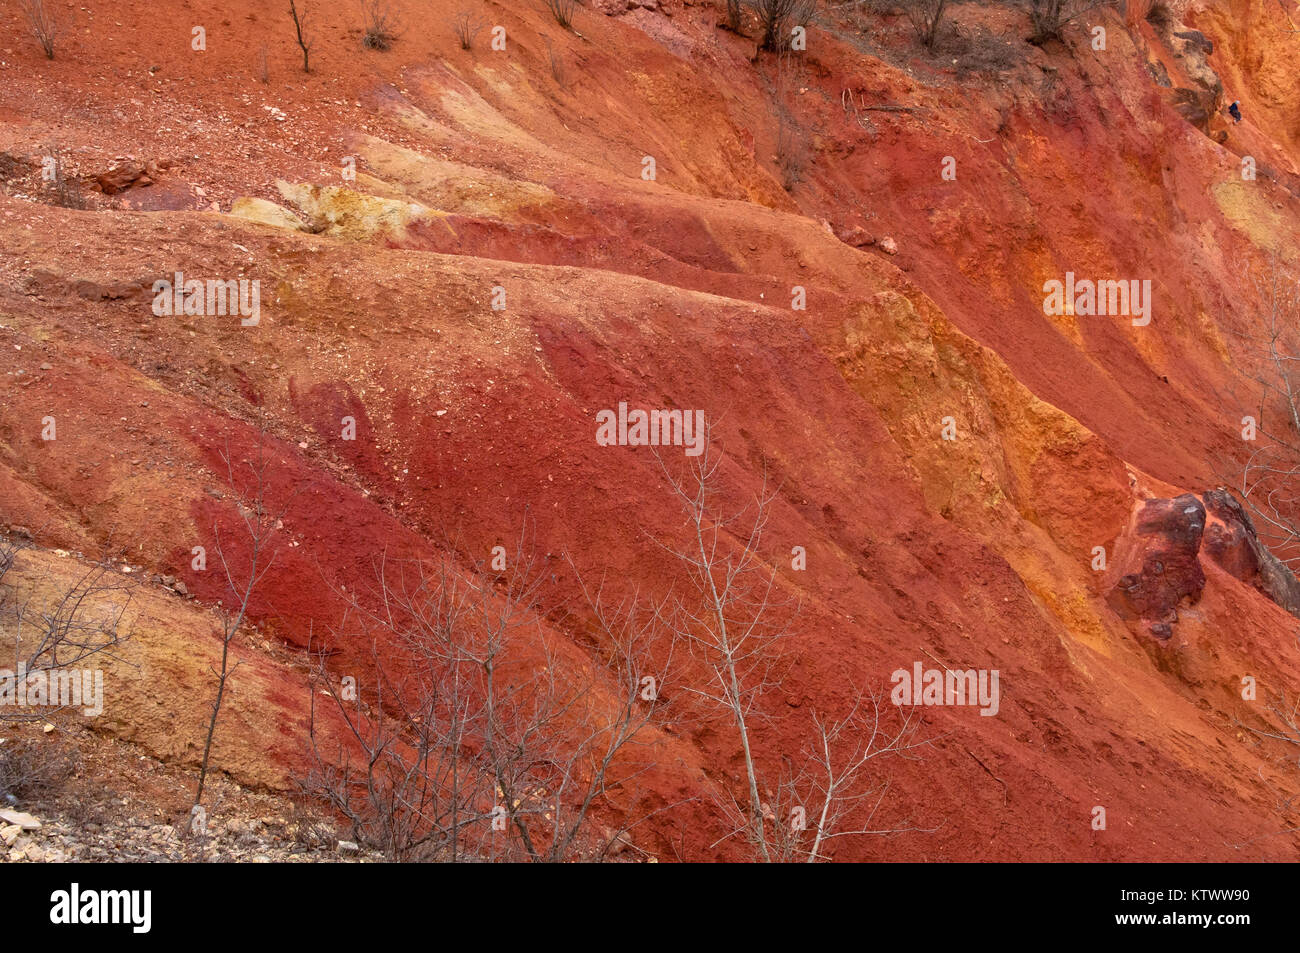 Weathering and surface erosion on an open area, eroded land Stock Photo